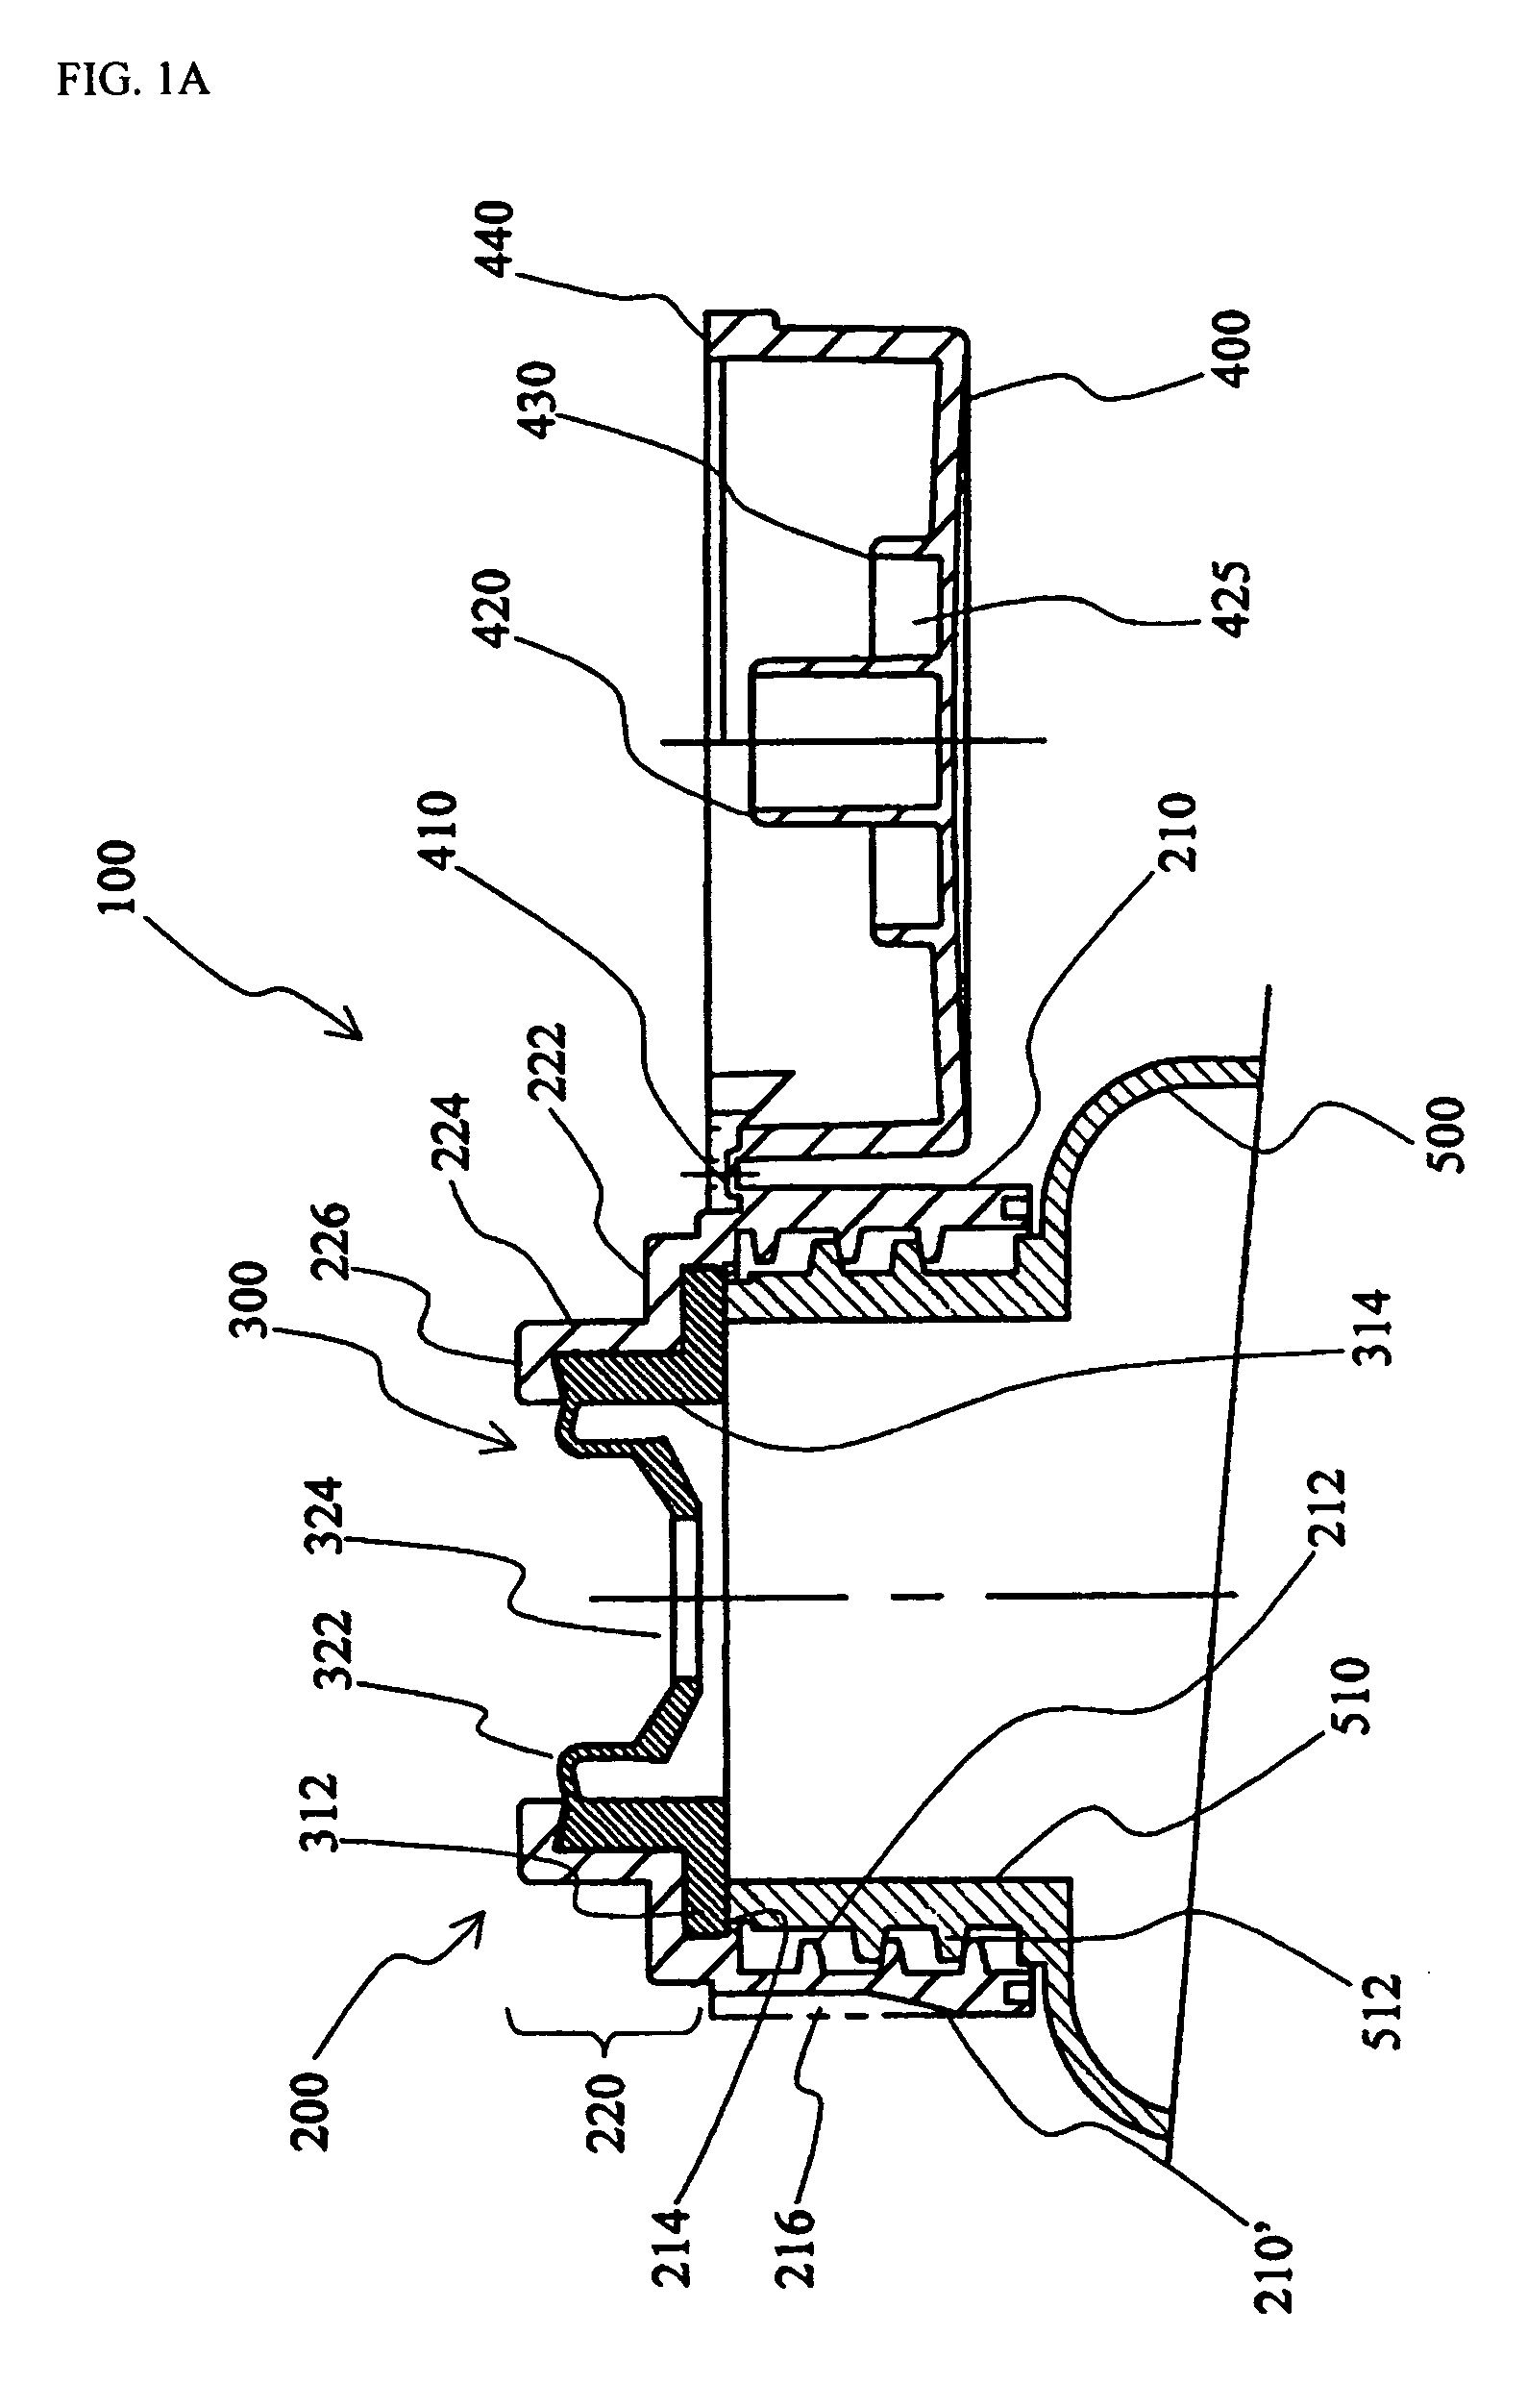 Dispensing closure with automatic sealing valve of single body